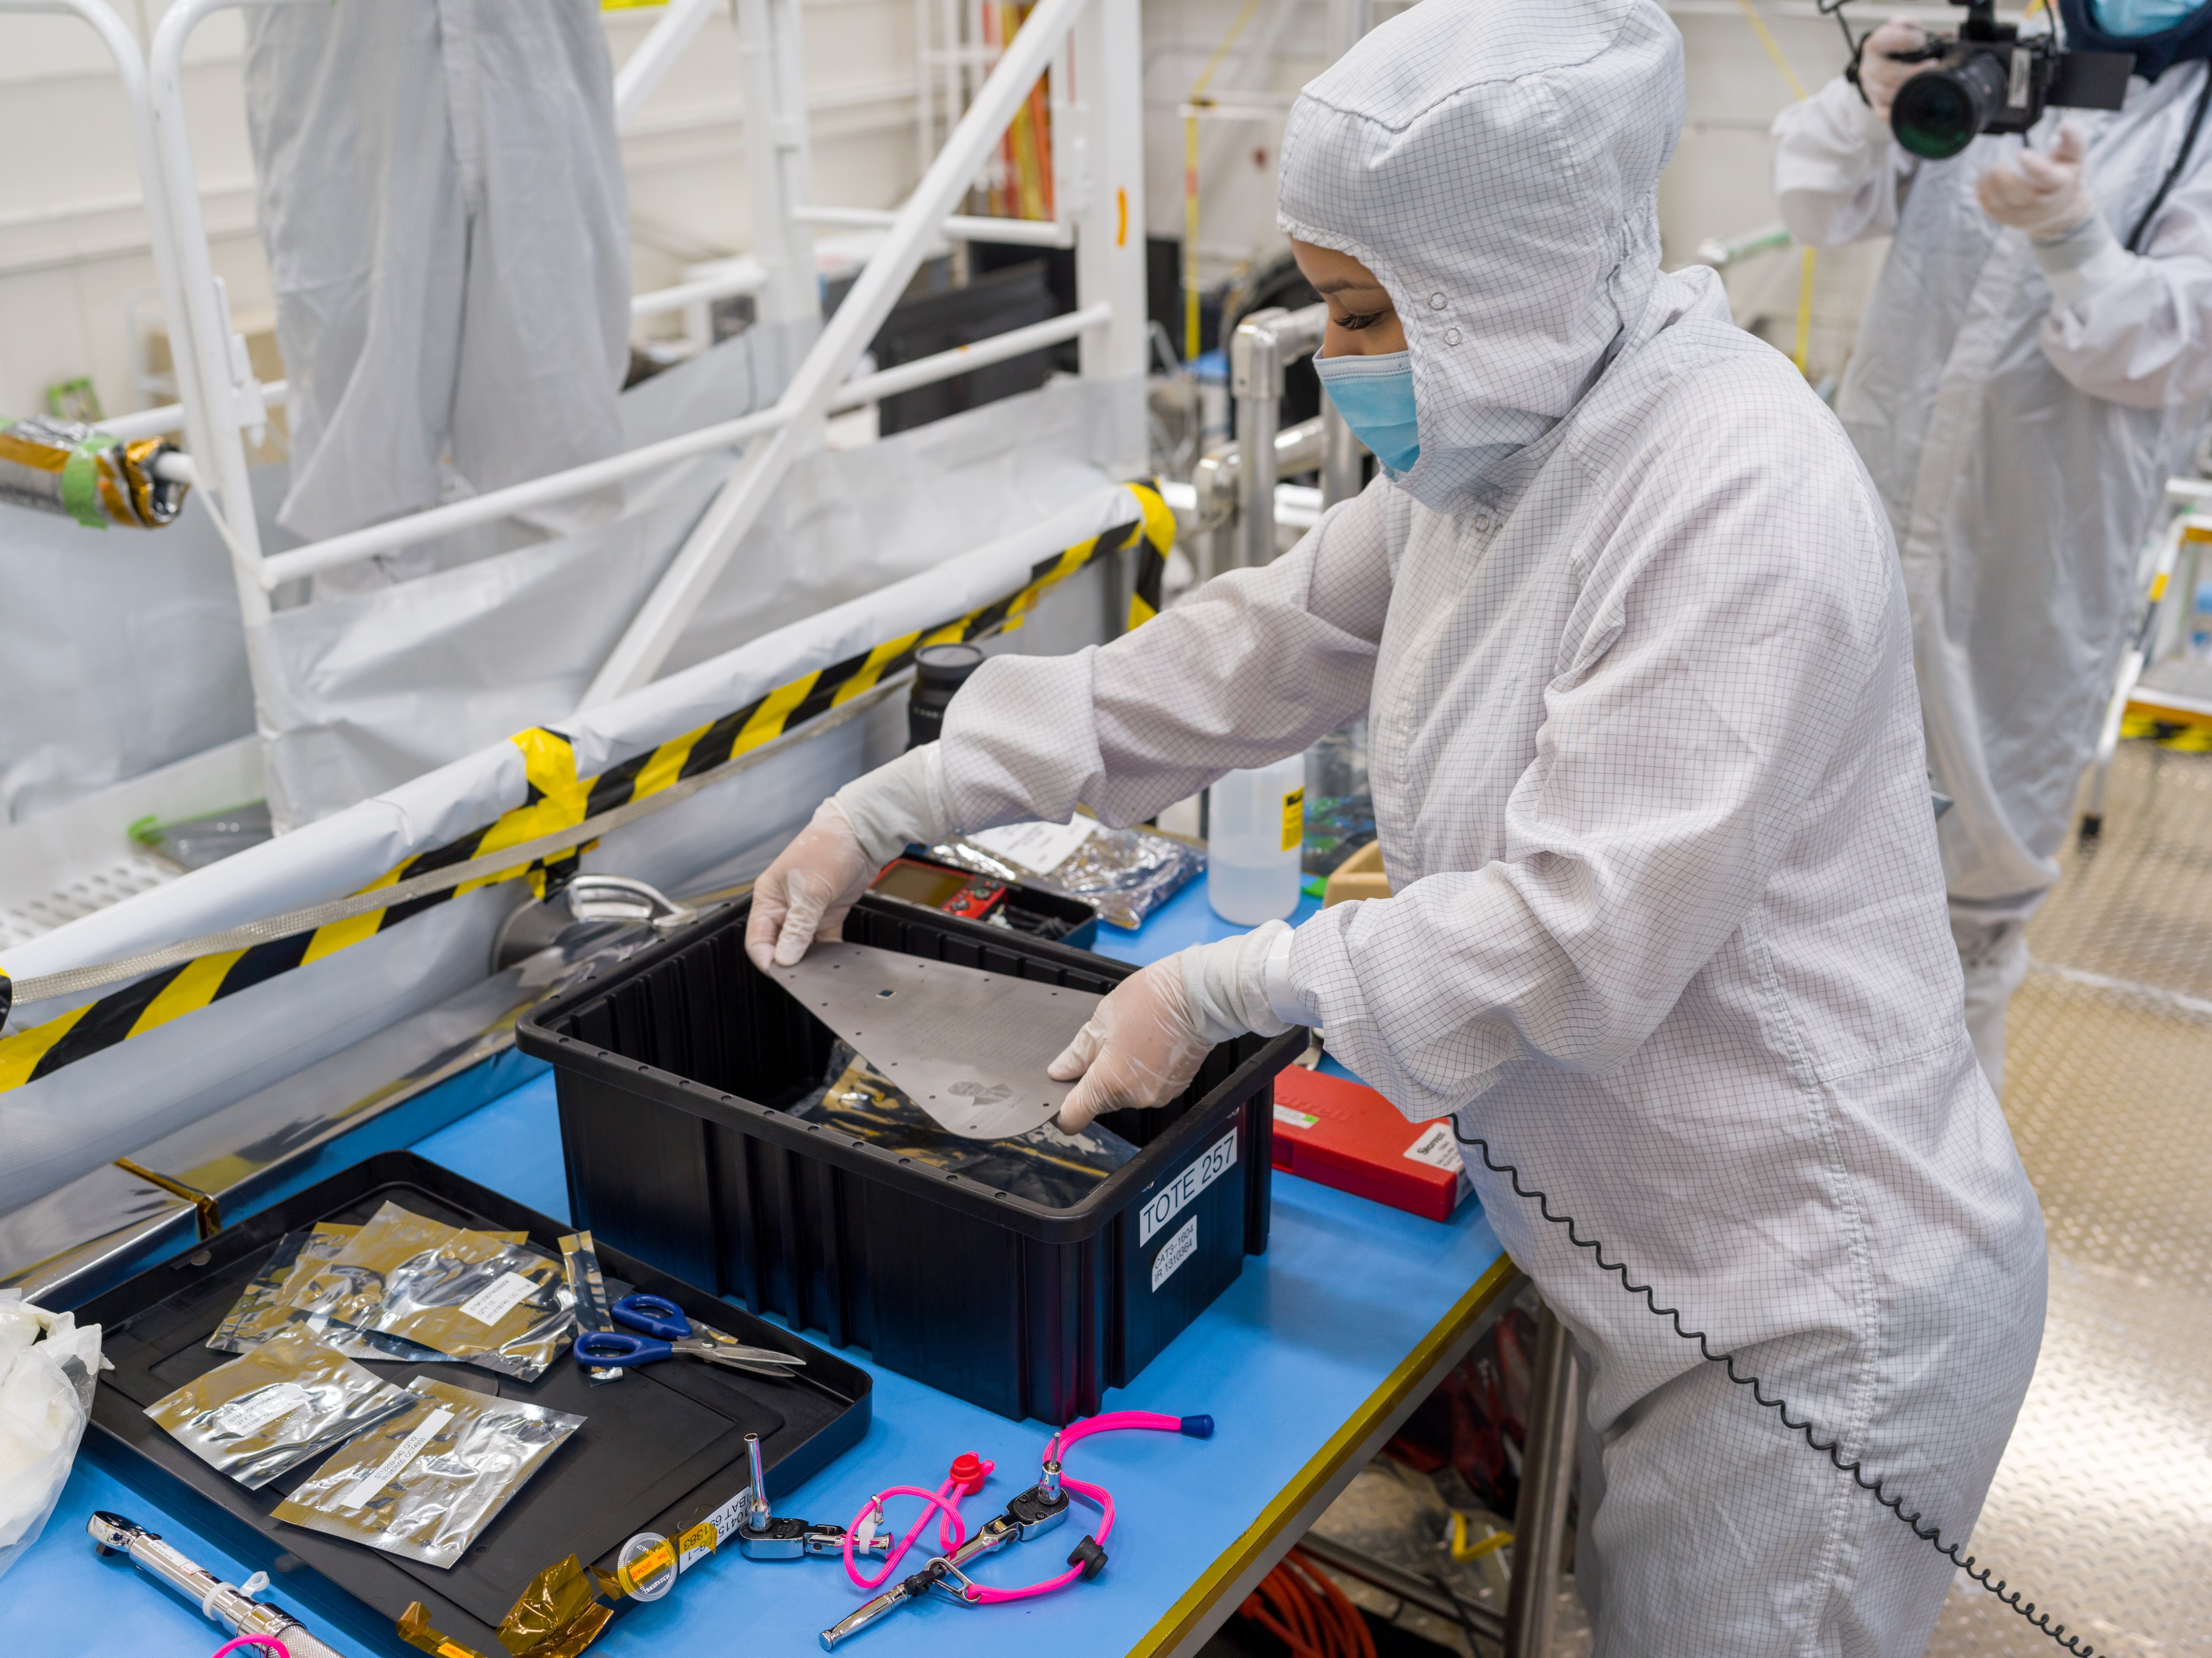 A technician in white protective clothing holds the triangular-shaped, silver-colored vault plate over a black box sitting on a work table with lots of tools around it. Another worker in protective clothing holds a video camera to record the moment.